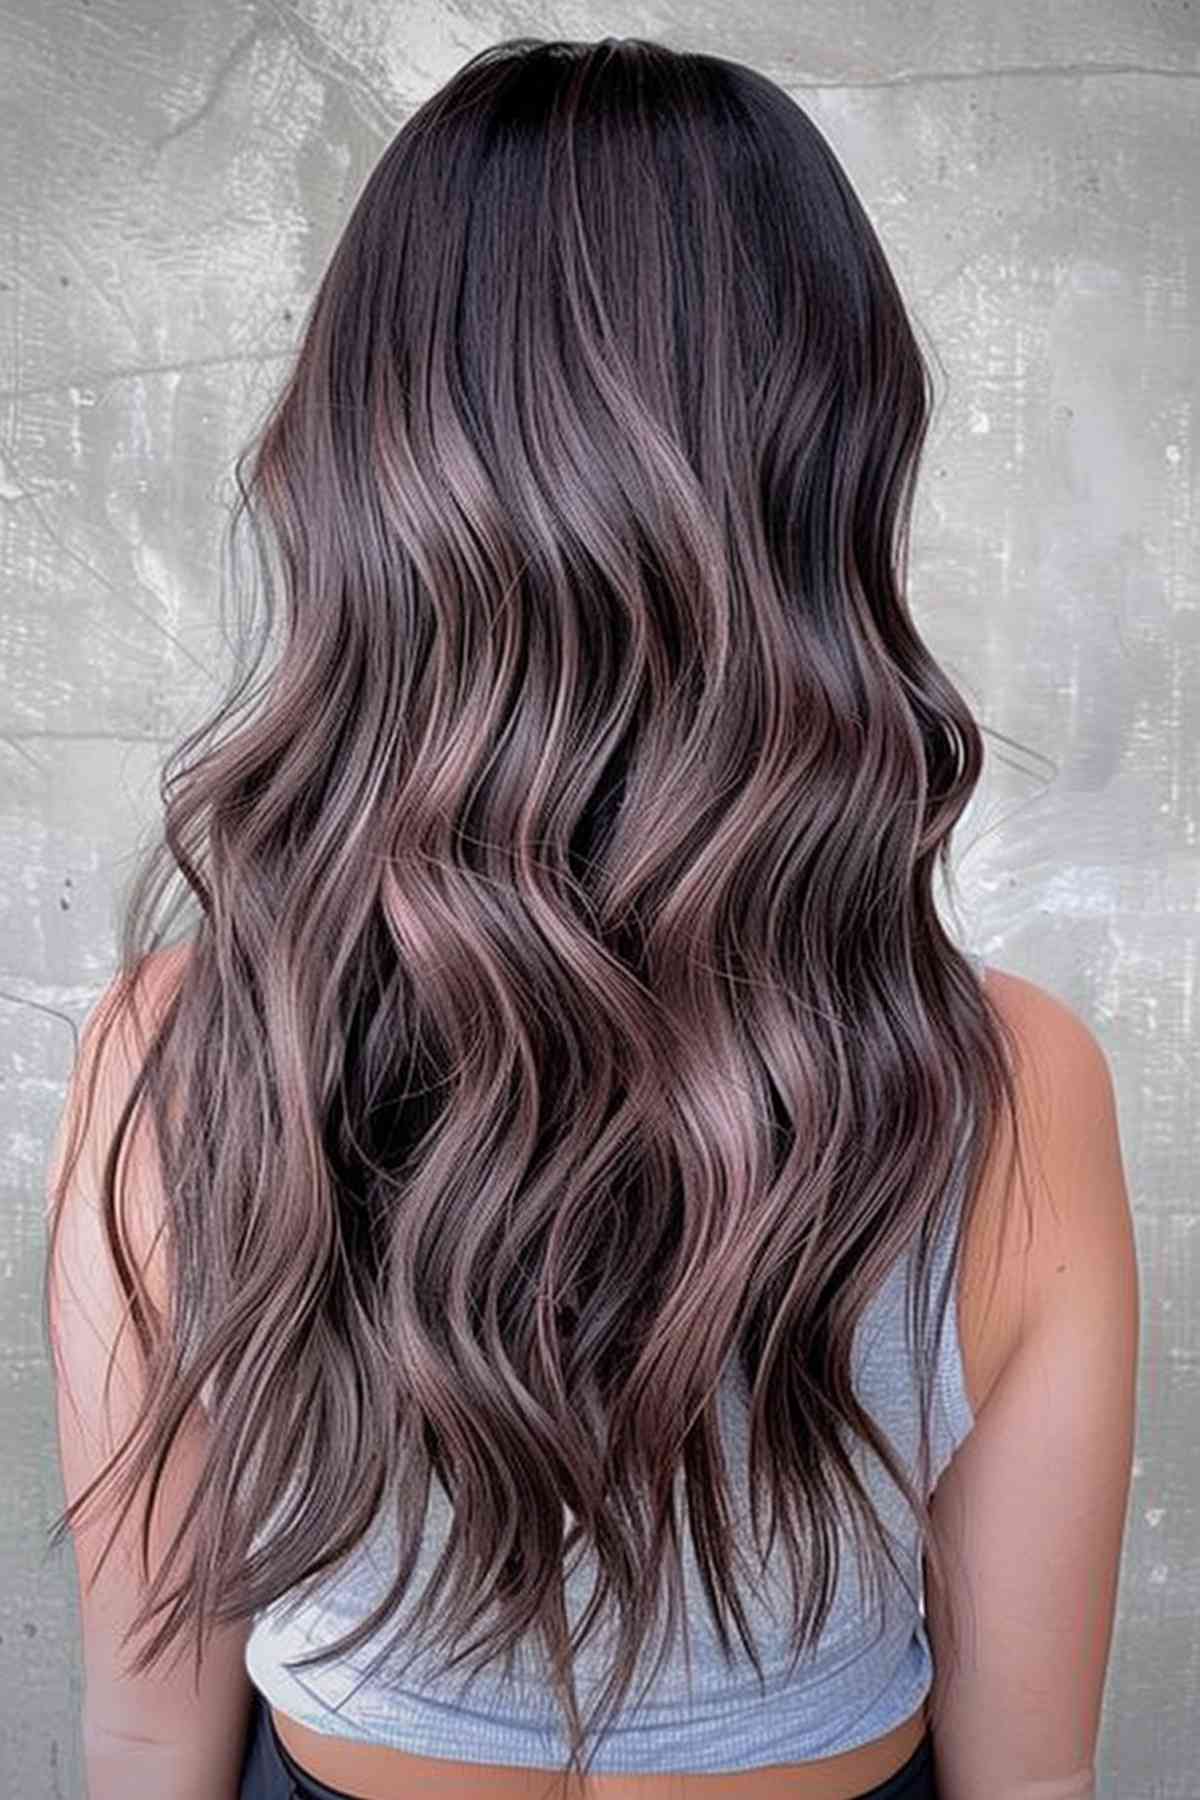 Long, wavy hair in mushroom brown with subtle violet undertones, enhancing depth and adding a unique twist to the natural brown shade.